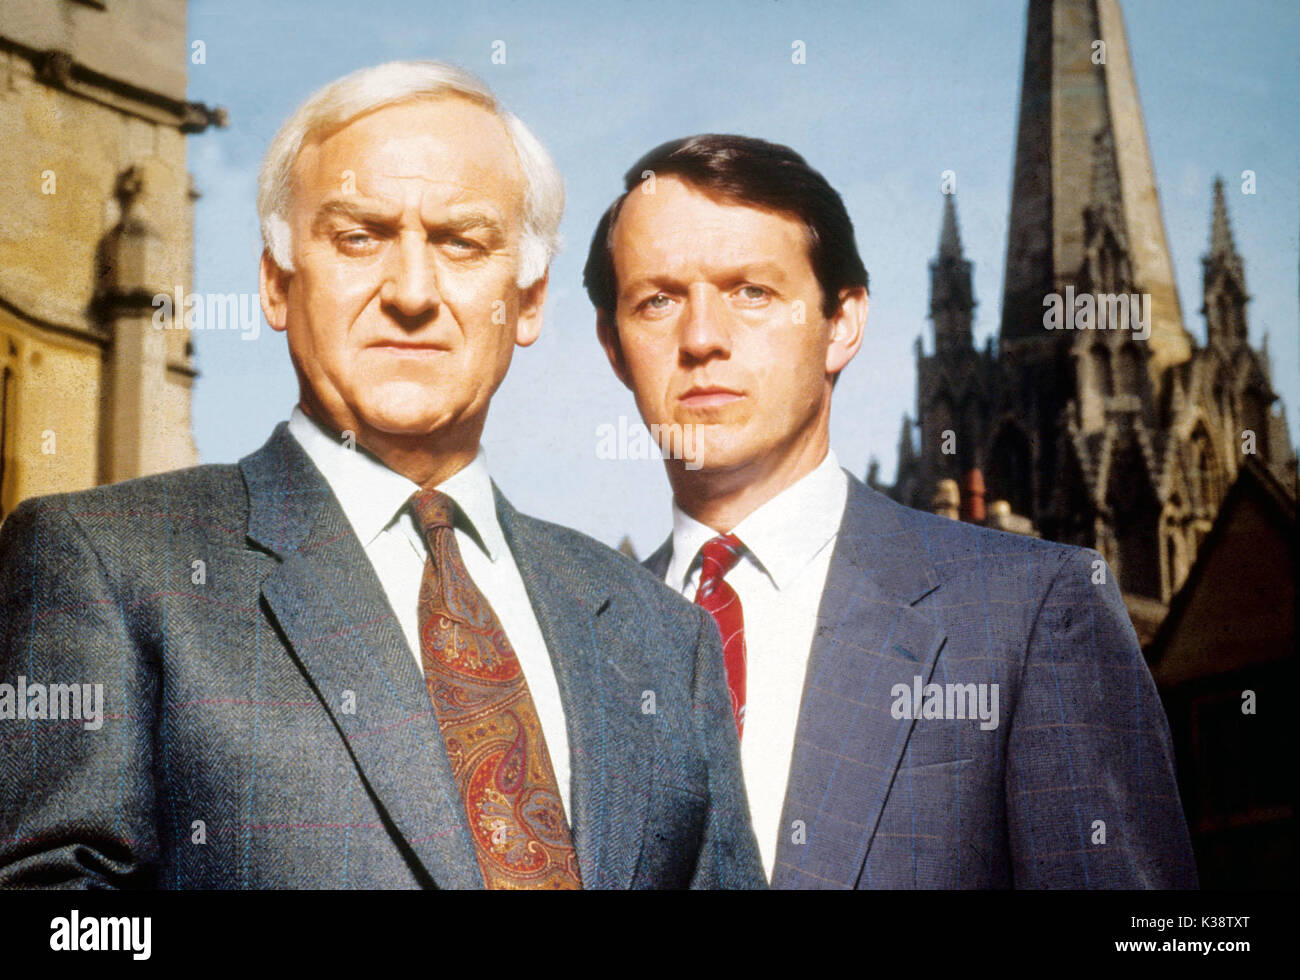 INSPECTOR MORSE SERIES V: 1991 JOHN THAW as Inspector Morse, KEVIN WHATELY as Det Sgt LEWIS Stock Photo